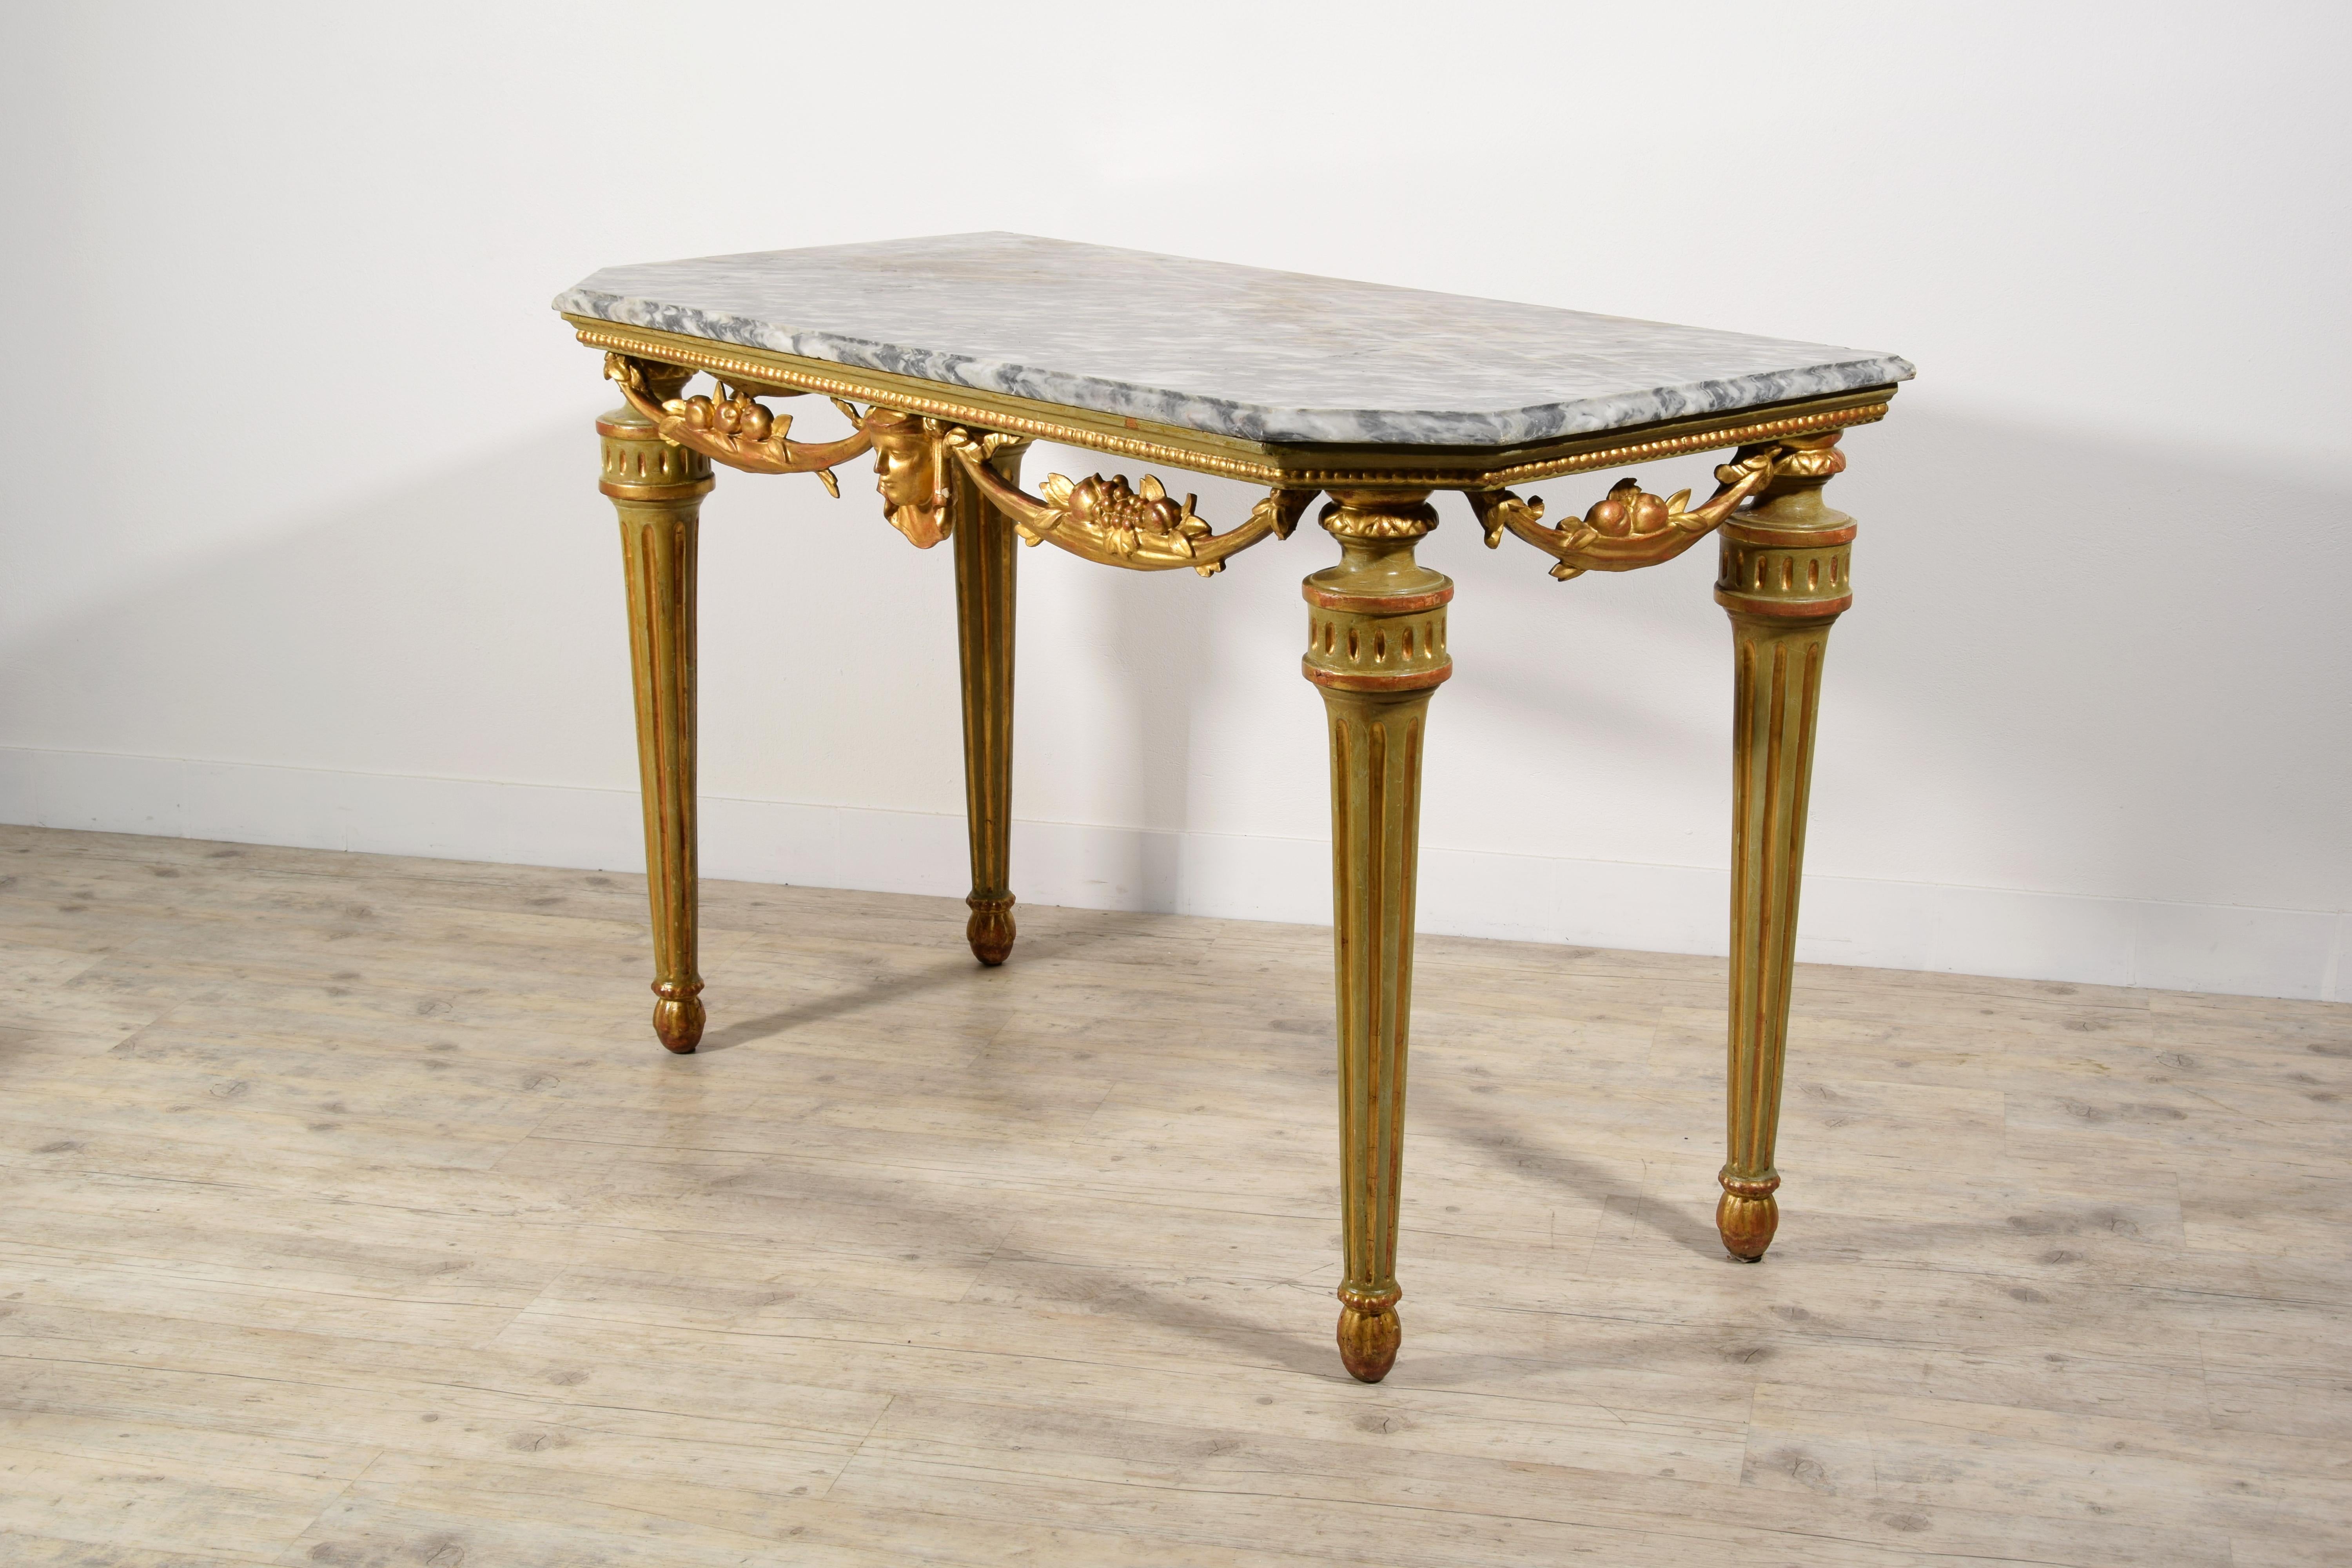 Hand-Carved 18th Century, Italian Neoclassical Lacquered and Gilt Wood Console Table For Sale